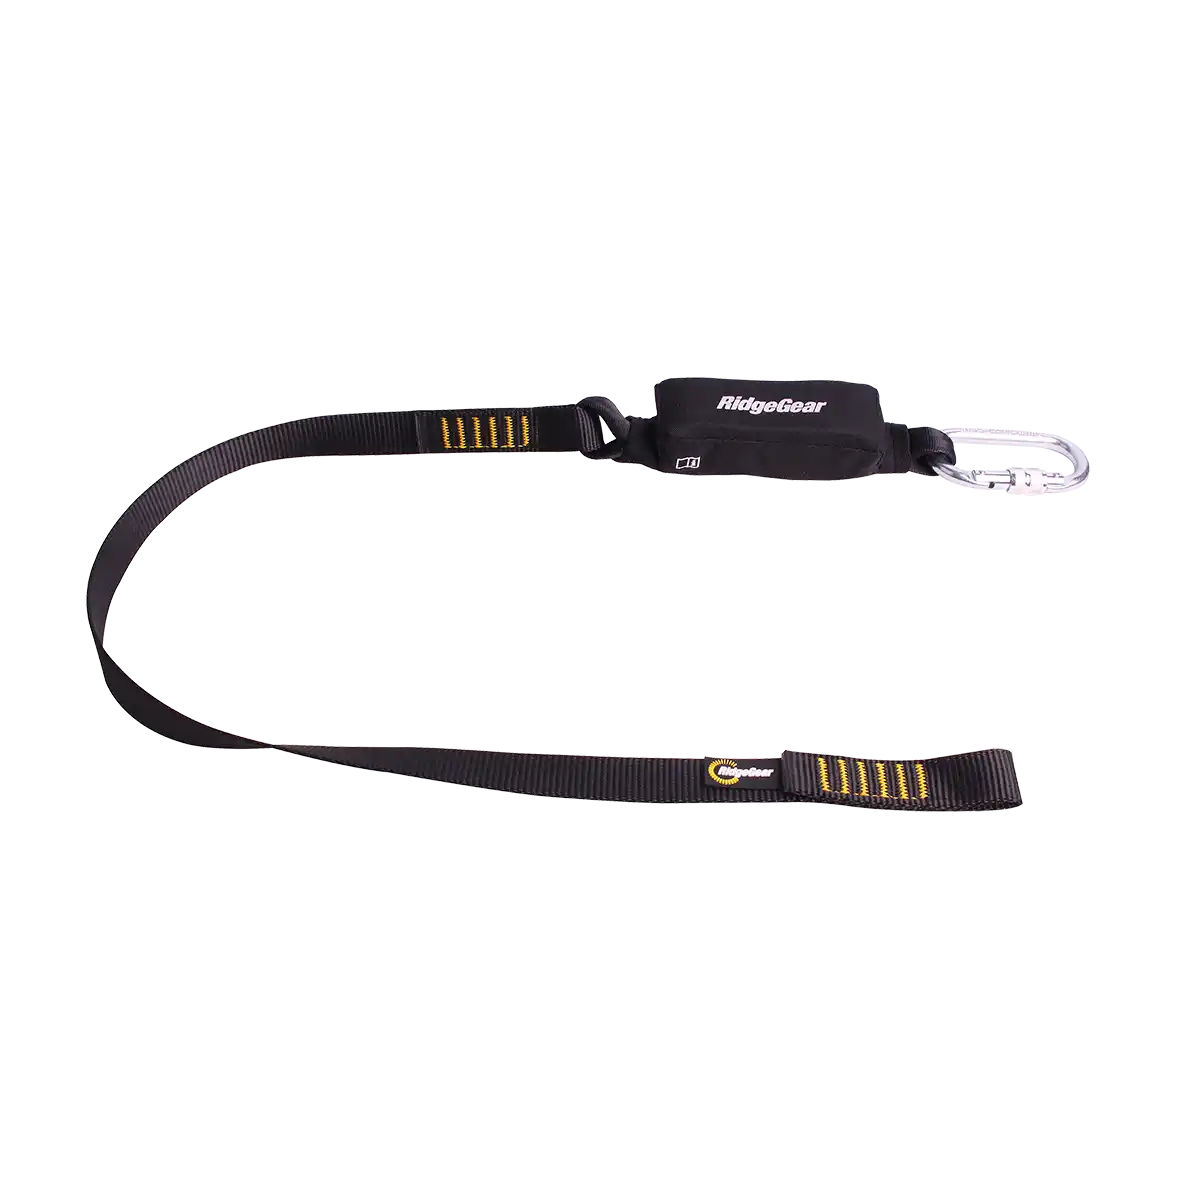 Image of our Shock Absorber Lanyard product